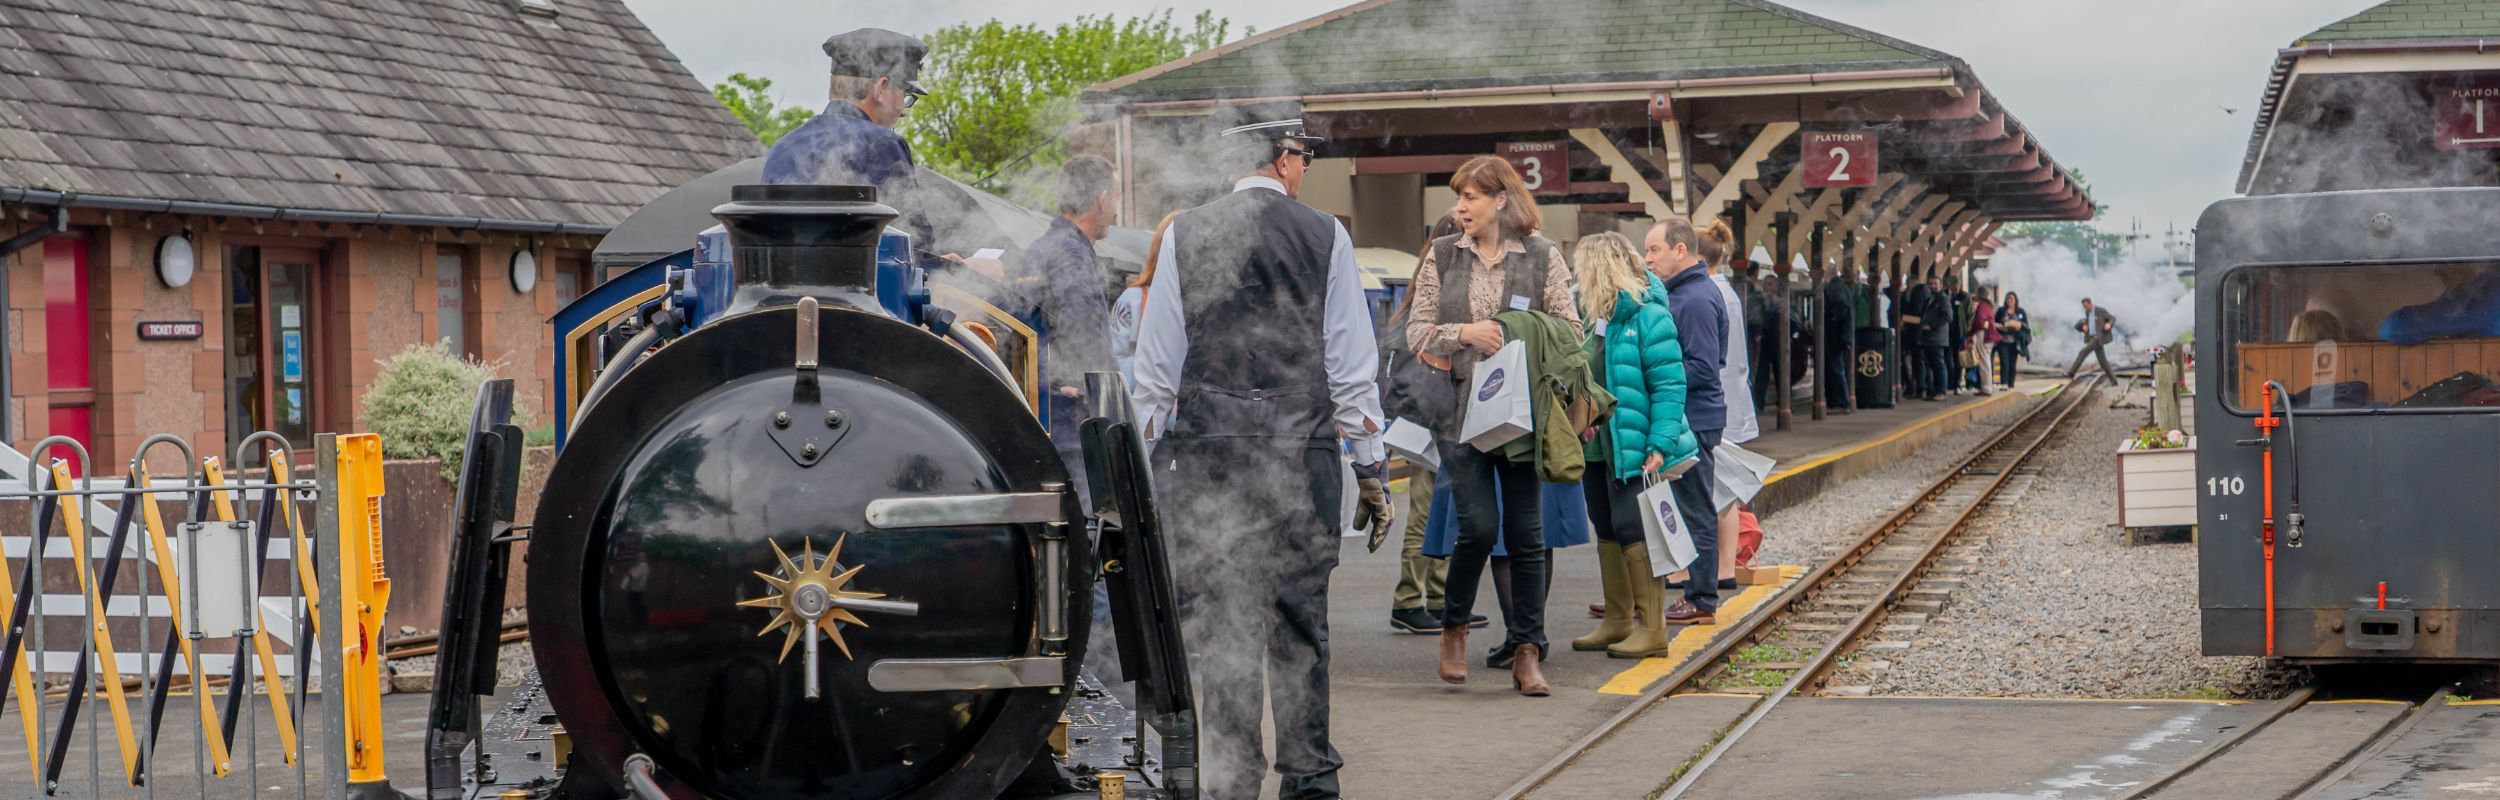 A group disembark the train, led by heritage locomotive Whillan Beck at Ravenglass station